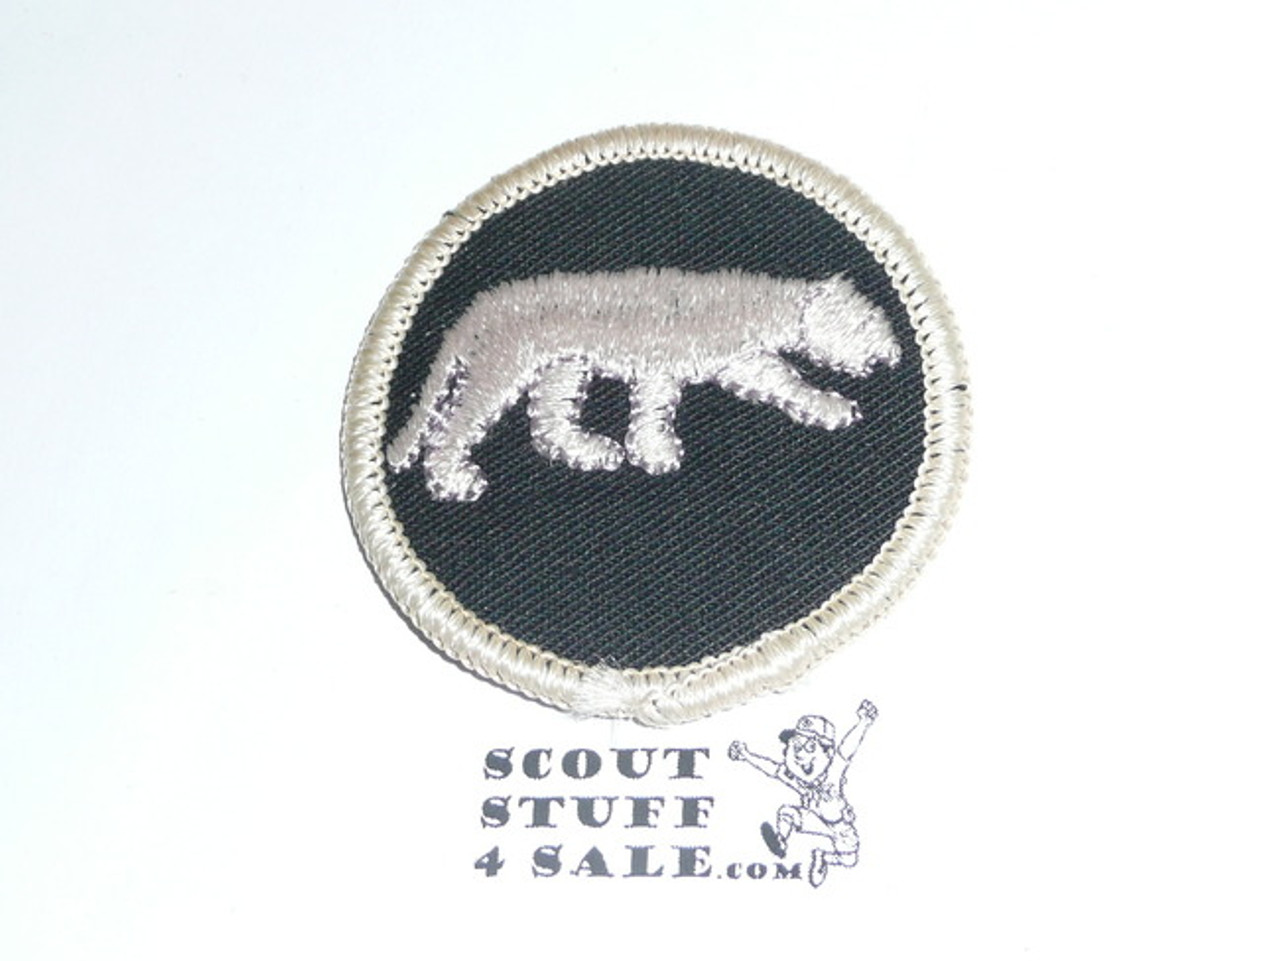 Panther Patrol Medallion, Black Twill (white outline of panther) with gauze back, 1972-1989